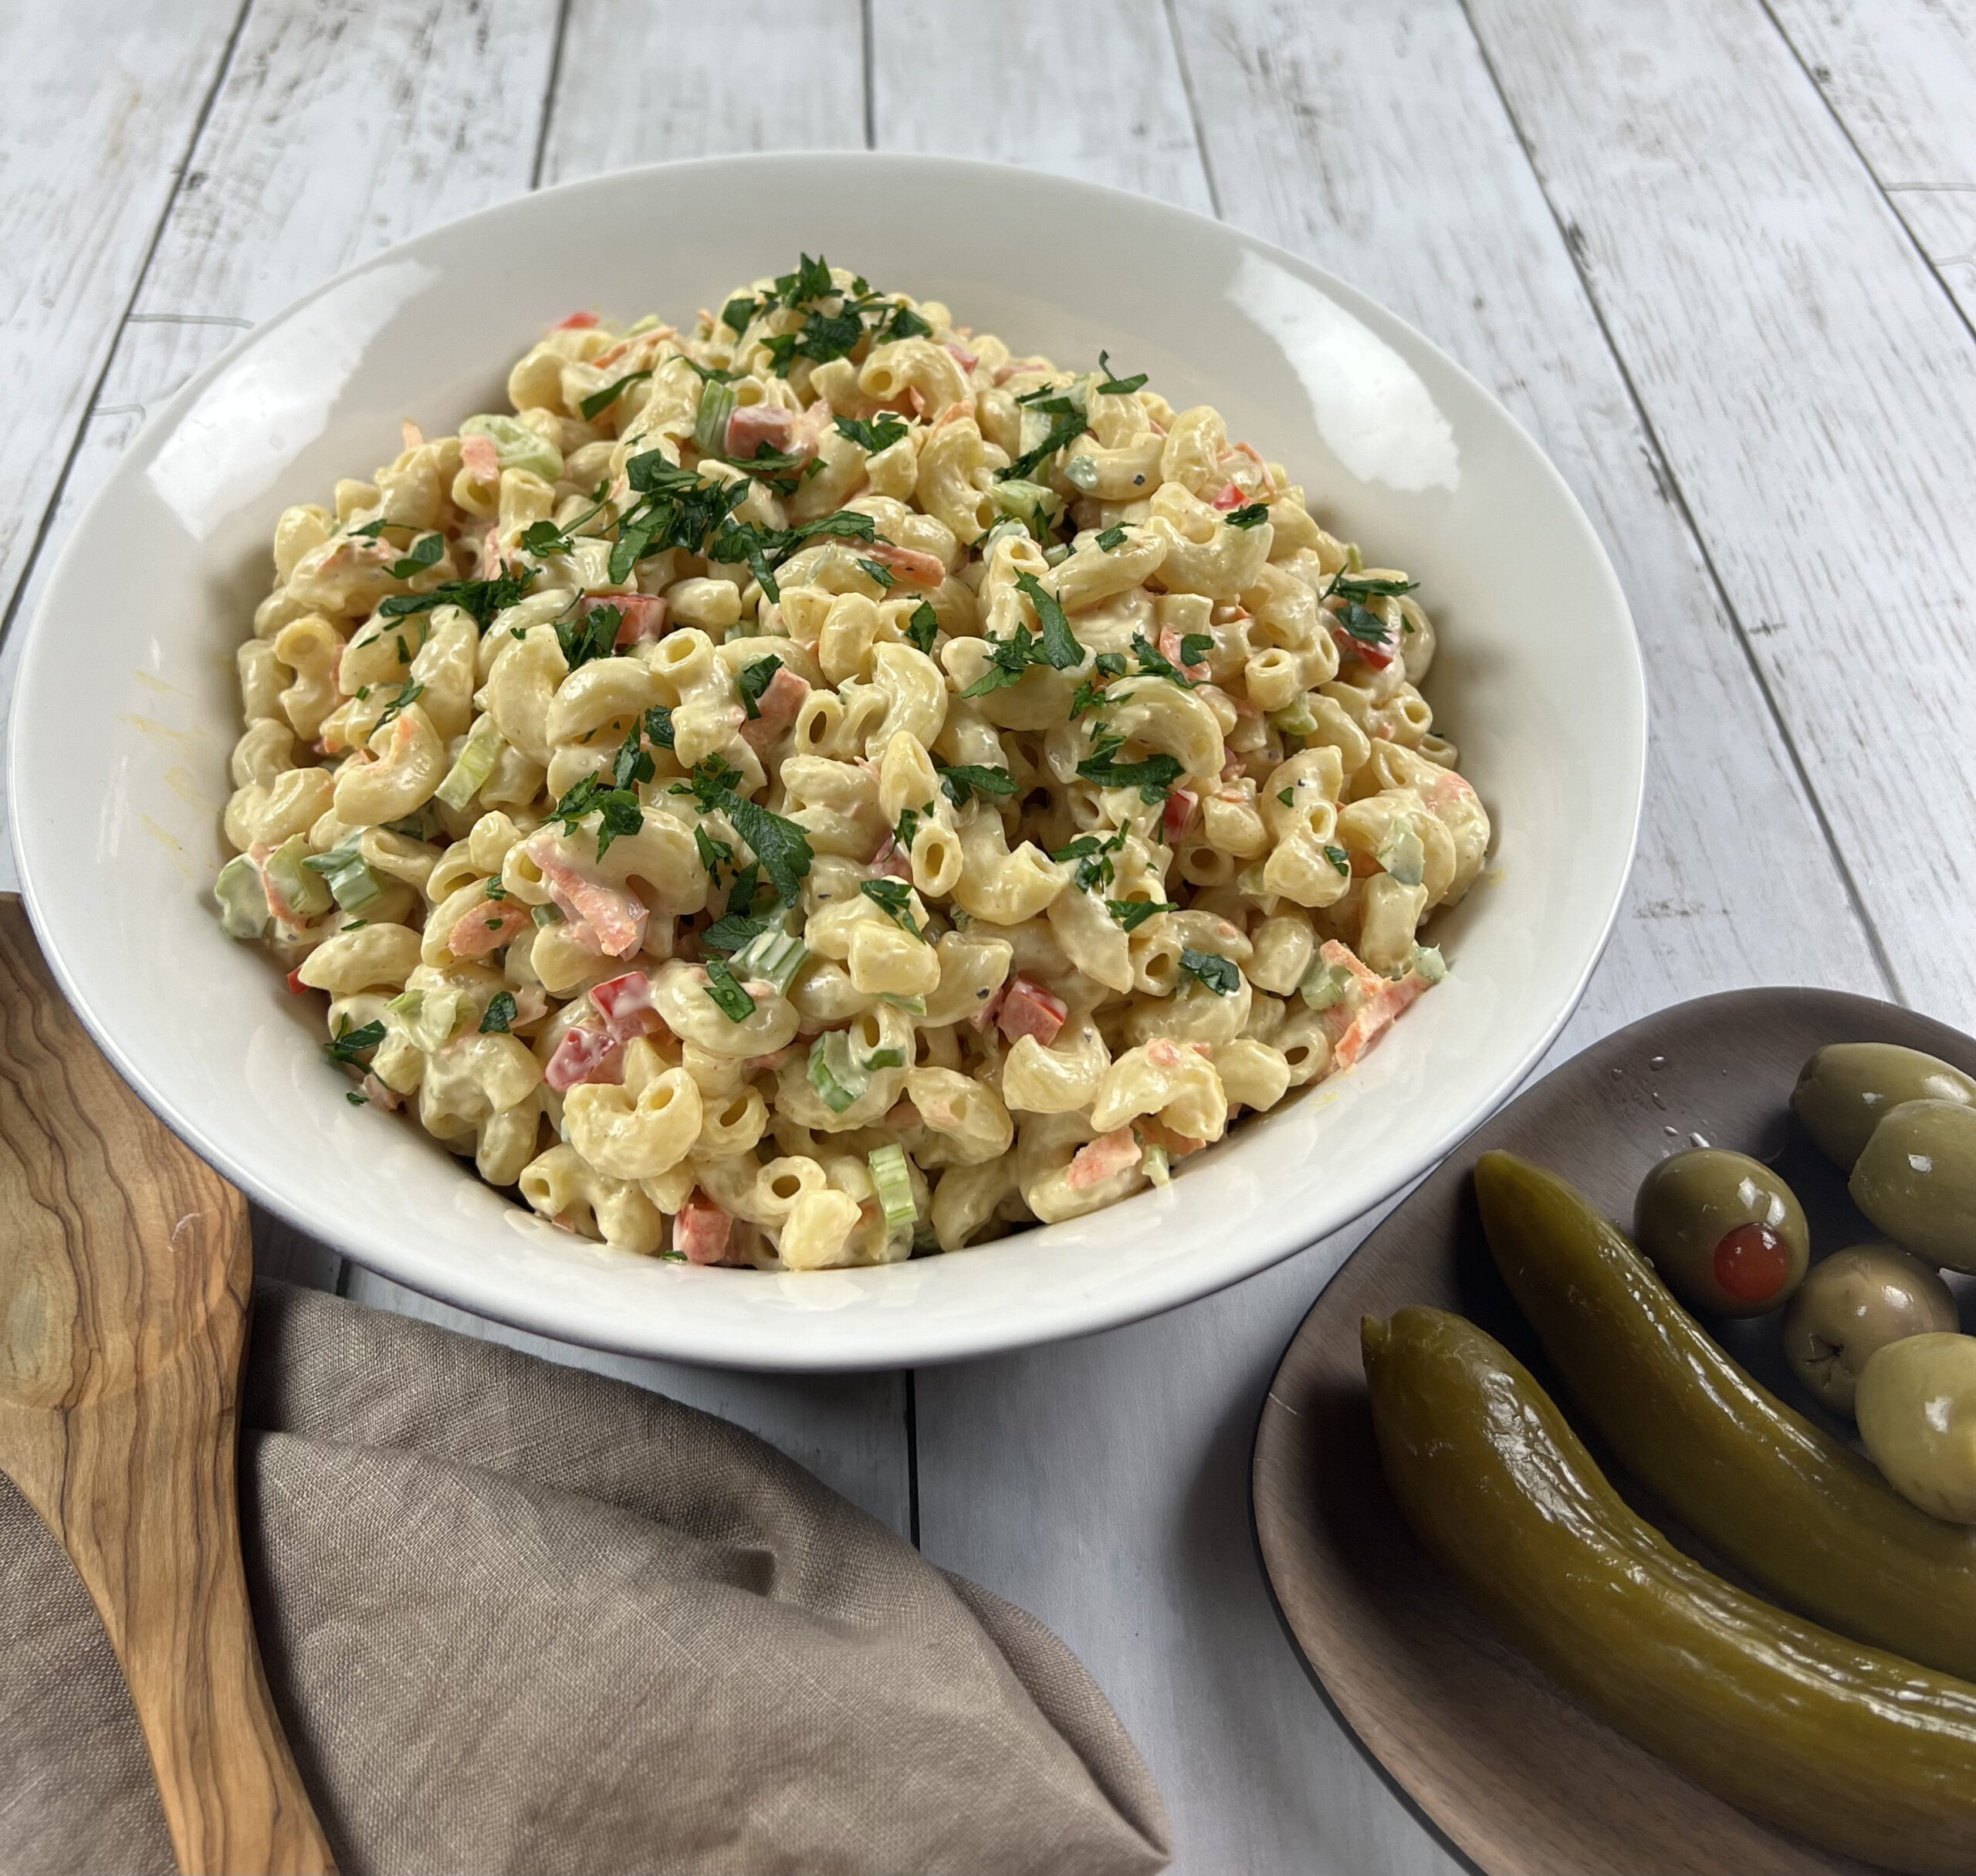 Final bowl of vibrant, creamy Deli-style Macaroni Salad, garnished with fresh herbs.